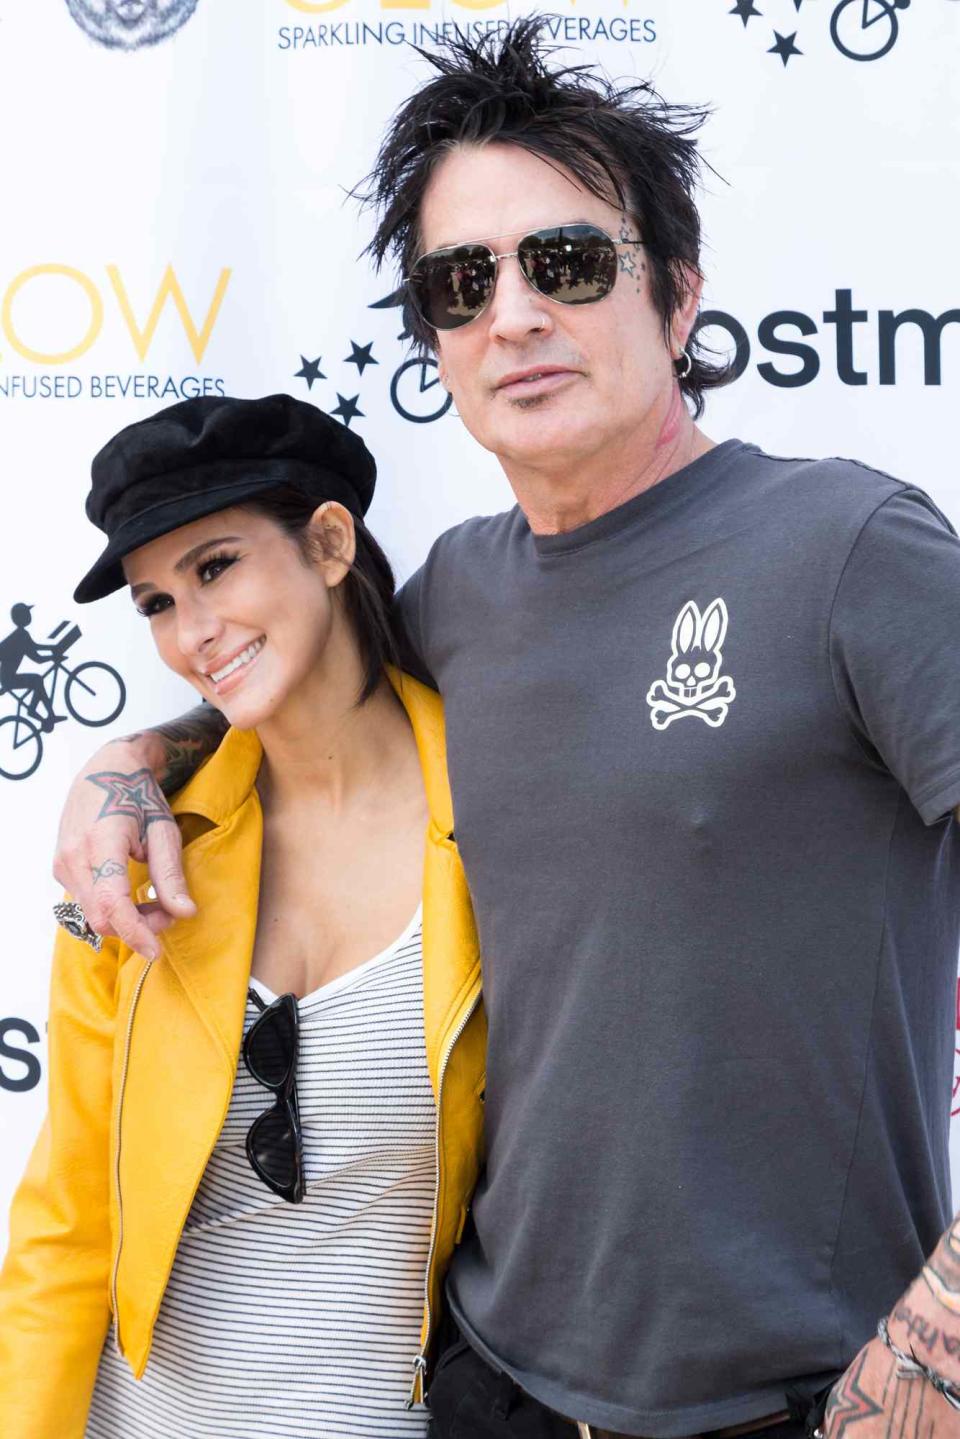 Tommy Lee and Fiance Brittany Furlan attend the Los Angeles Times Food Bowl - Secret Burger Showdown at Wallis Annenberg Center for the Performing Arts on May 26, 2018 in Beverly Hills, California